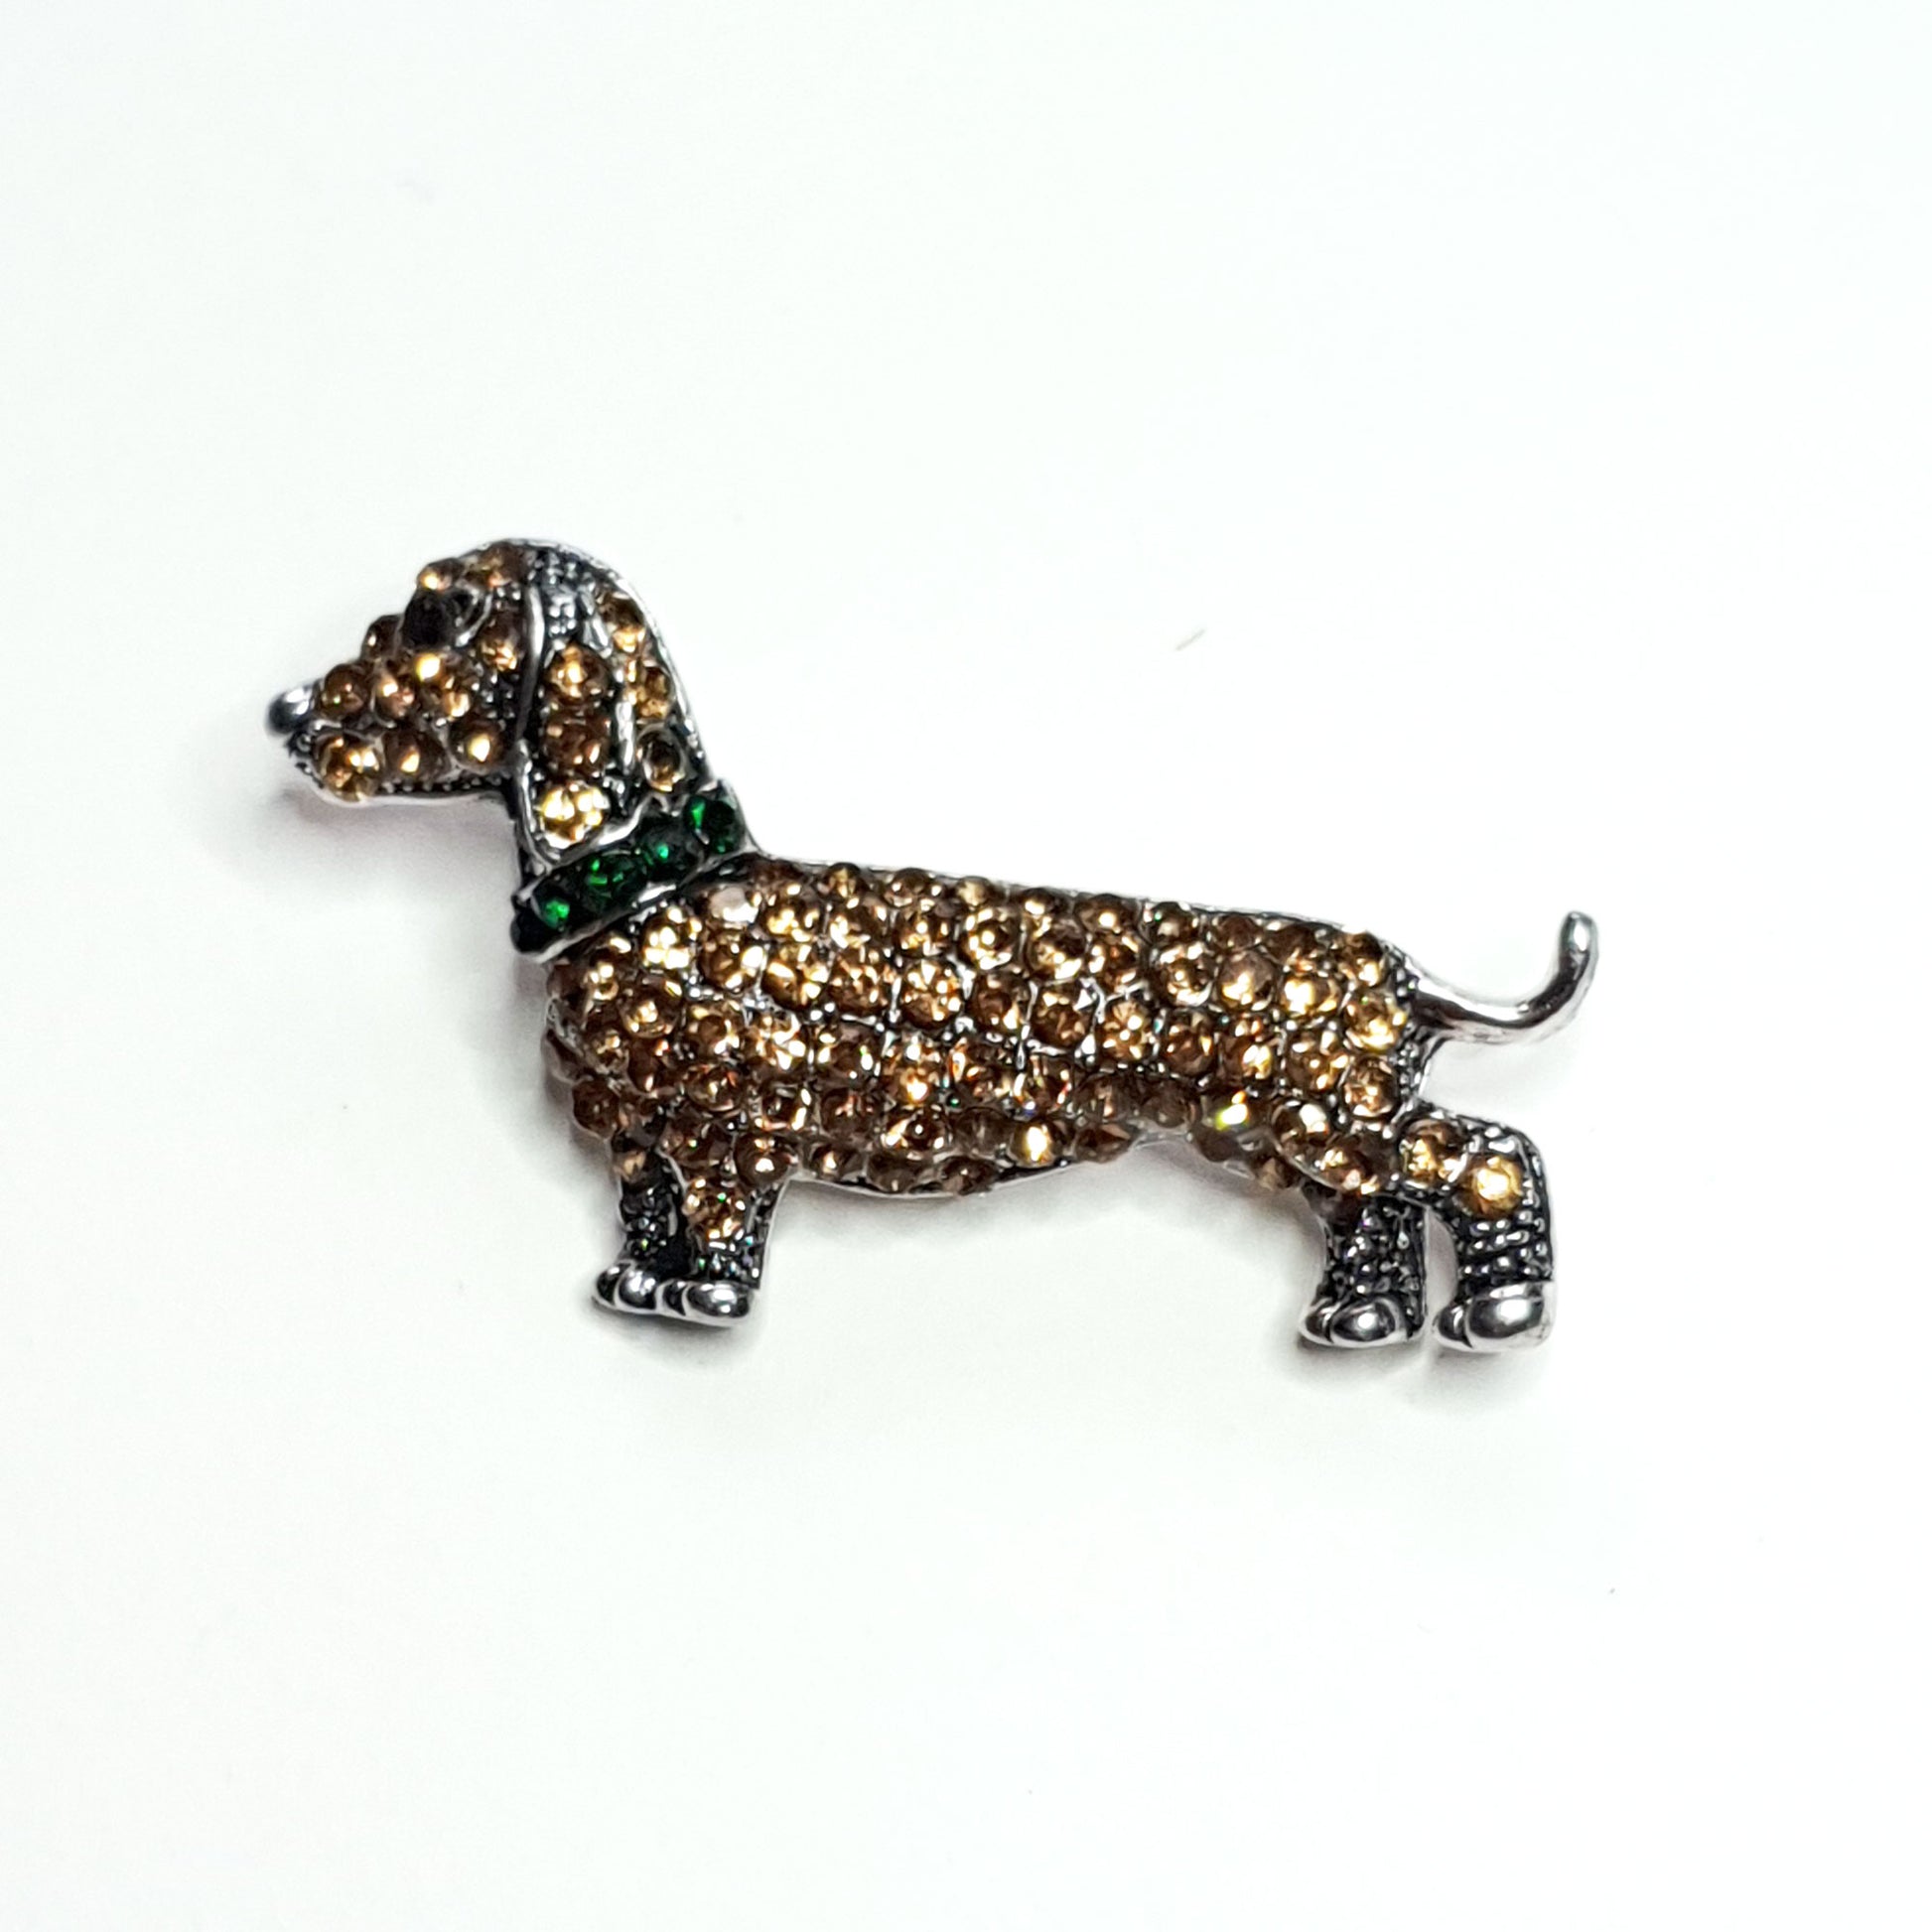 Dachshund brooch of gold diamante stones with a green collar